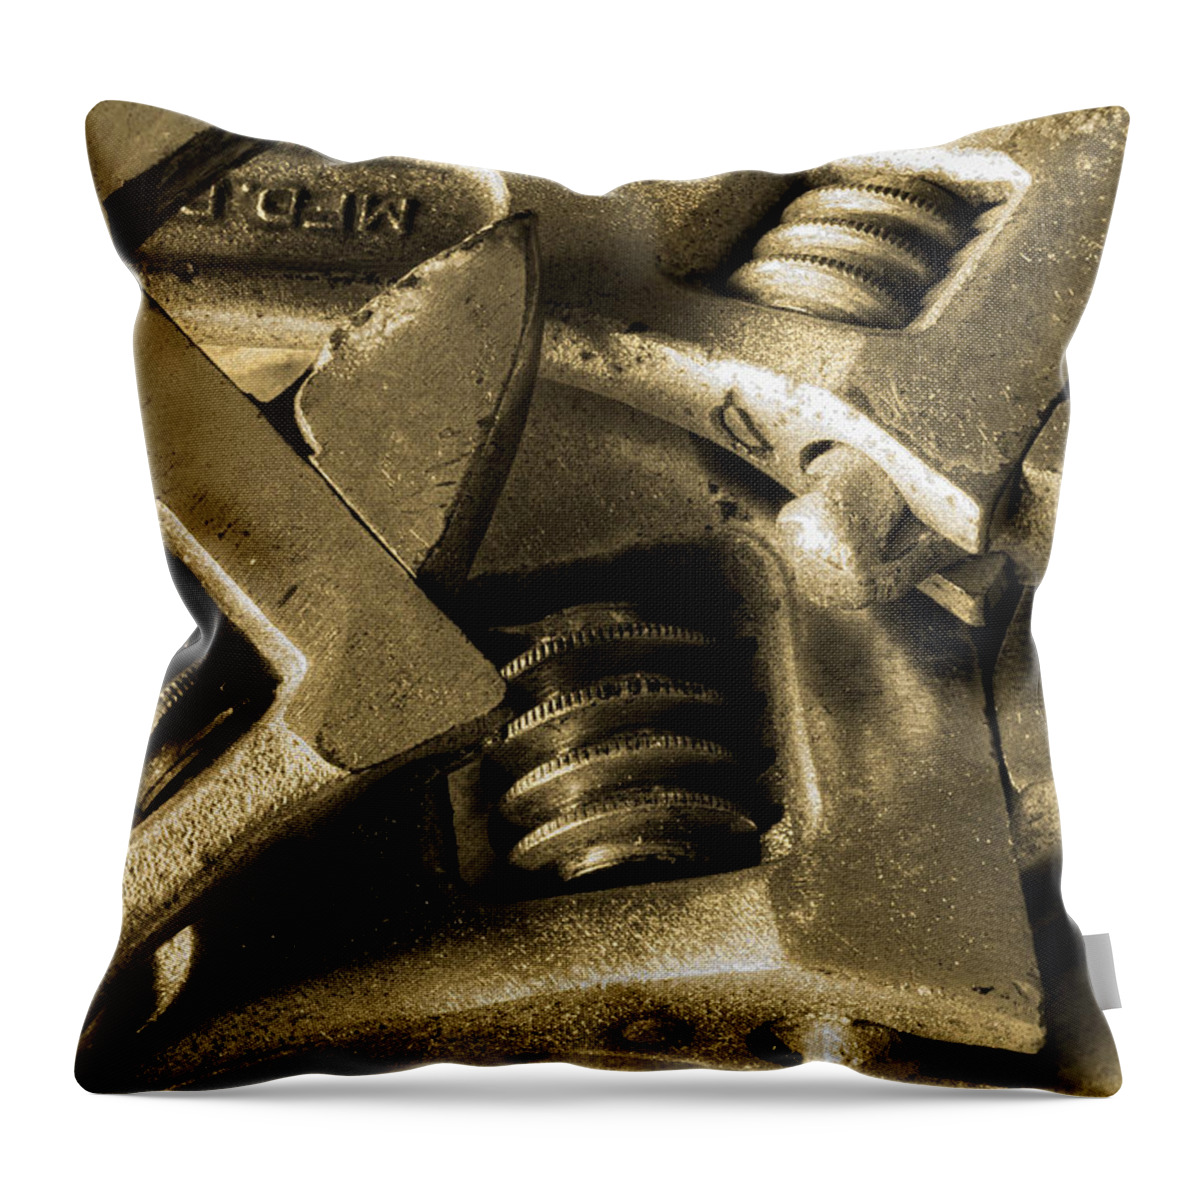 Hand Tools Throw Pillow featuring the photograph Wrenches by Michael Eingle